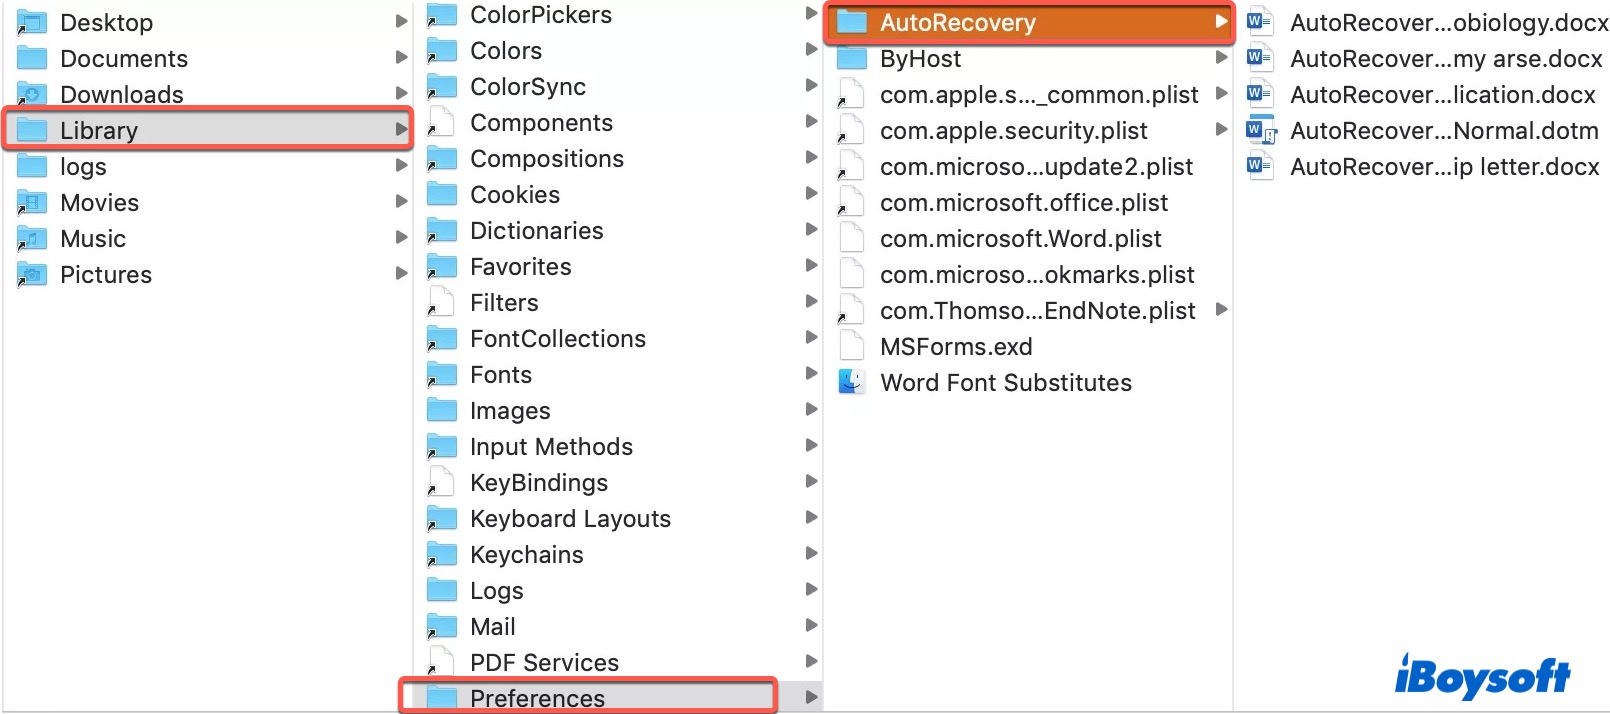 showing the AutoRecovery folder in Finder